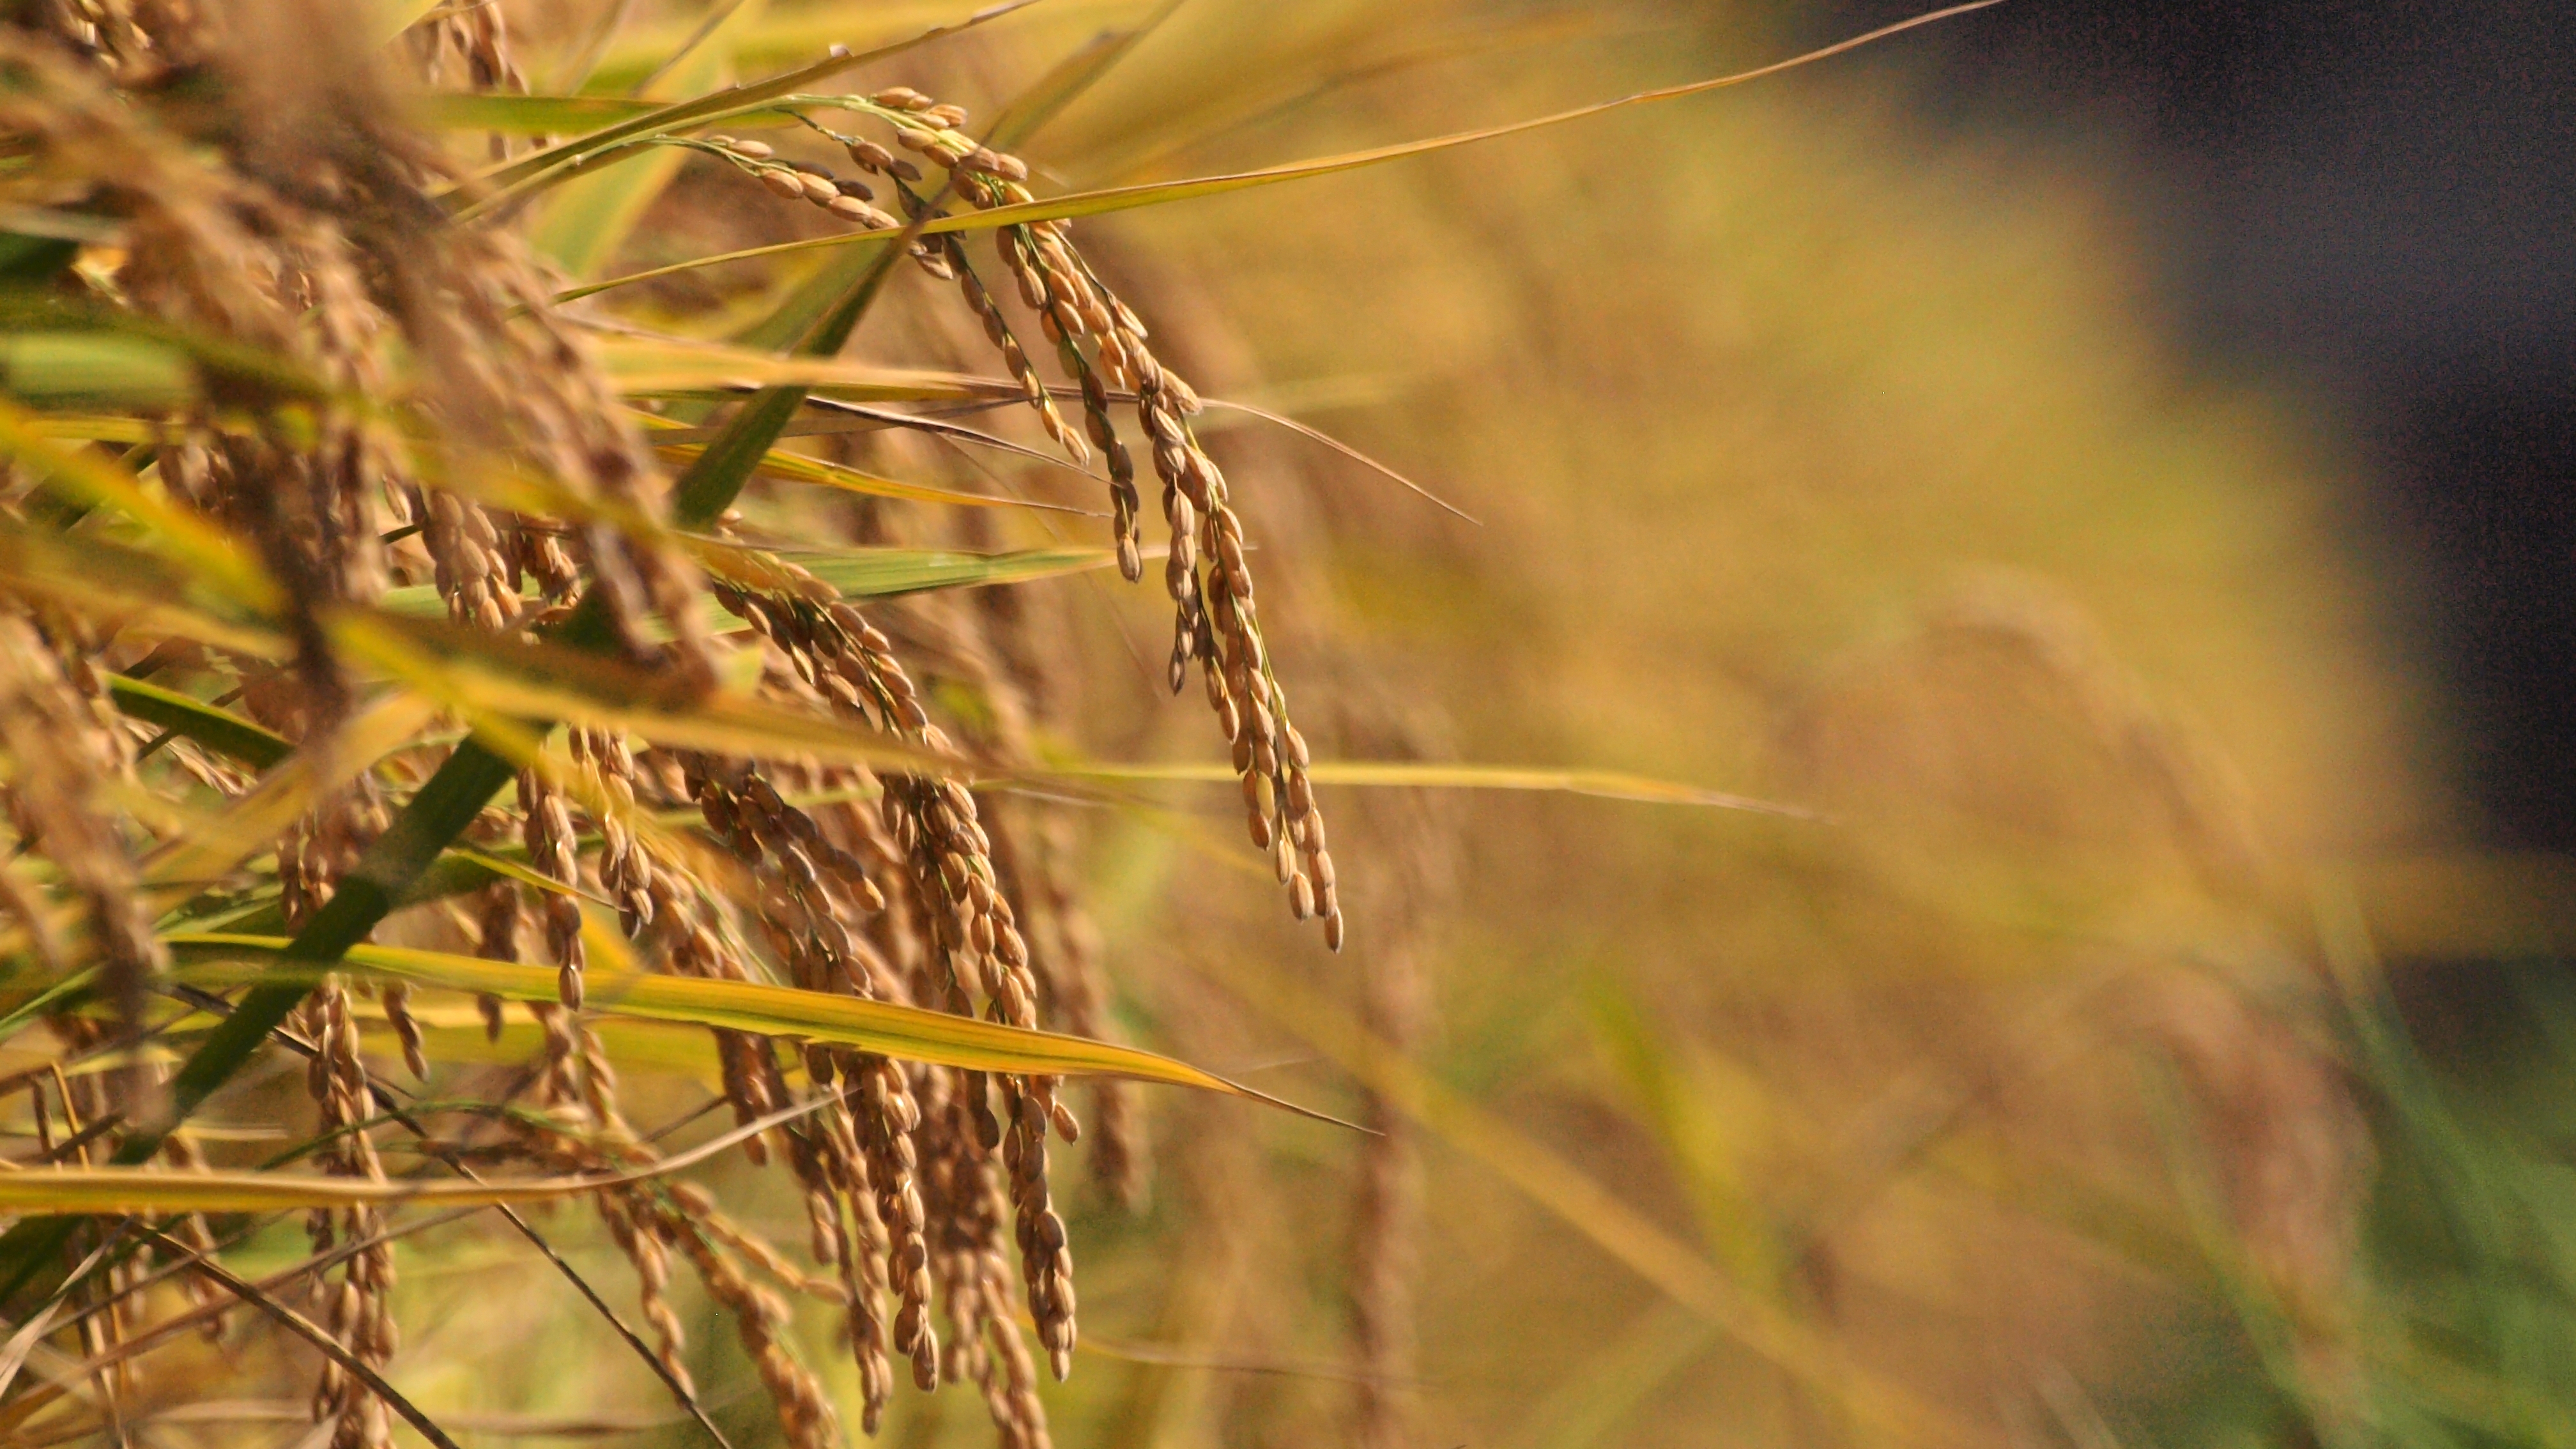 A photo of ears of rice growing in a field; photo by conifer on flickr